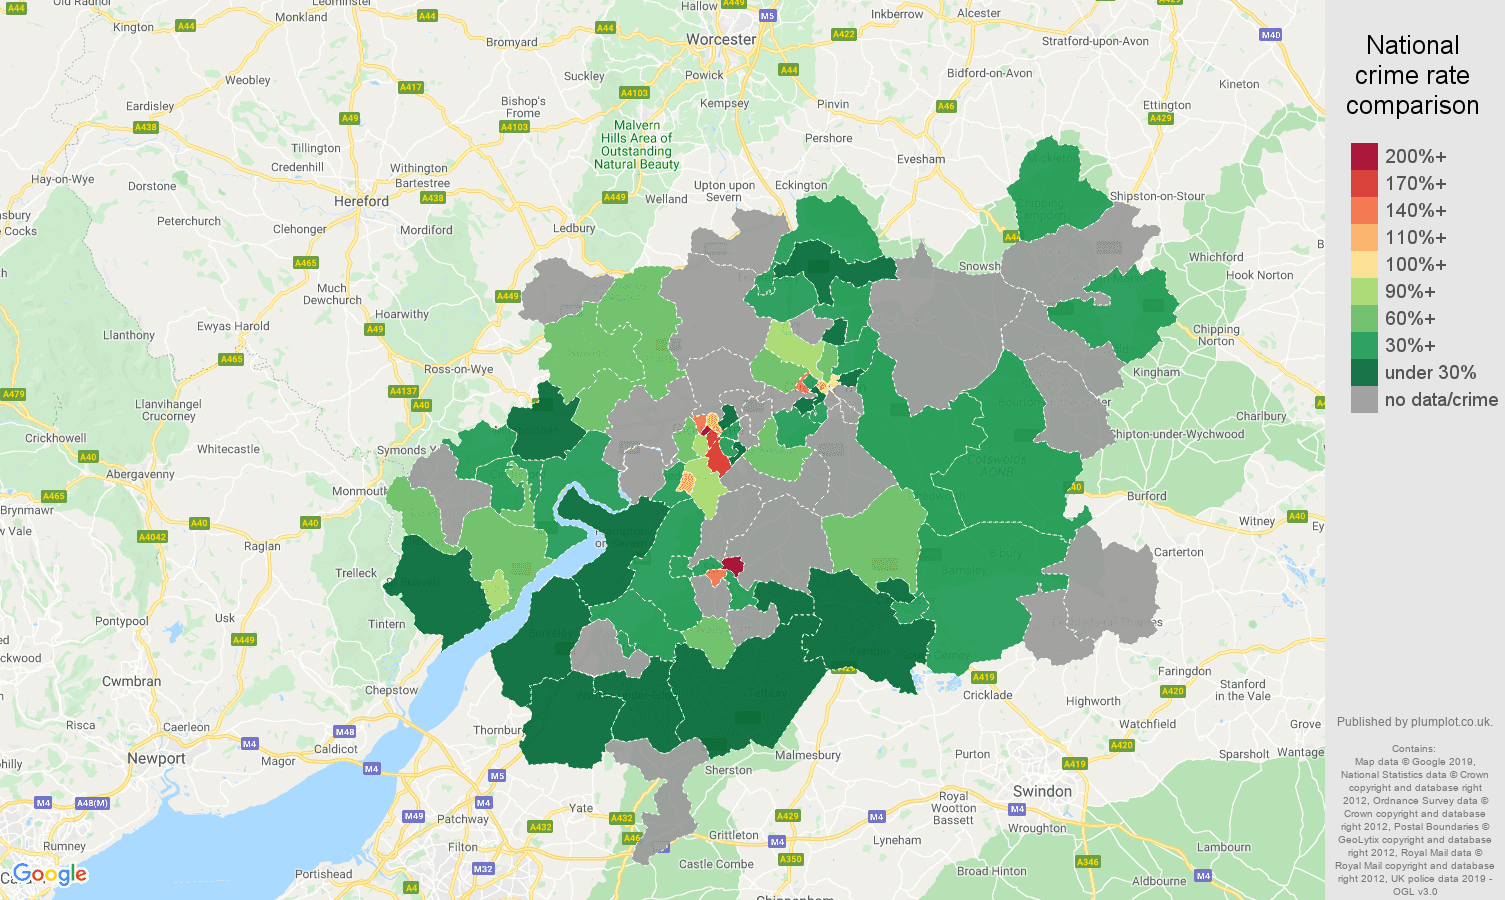 Gloucester possession of weapons crime rate comparison map